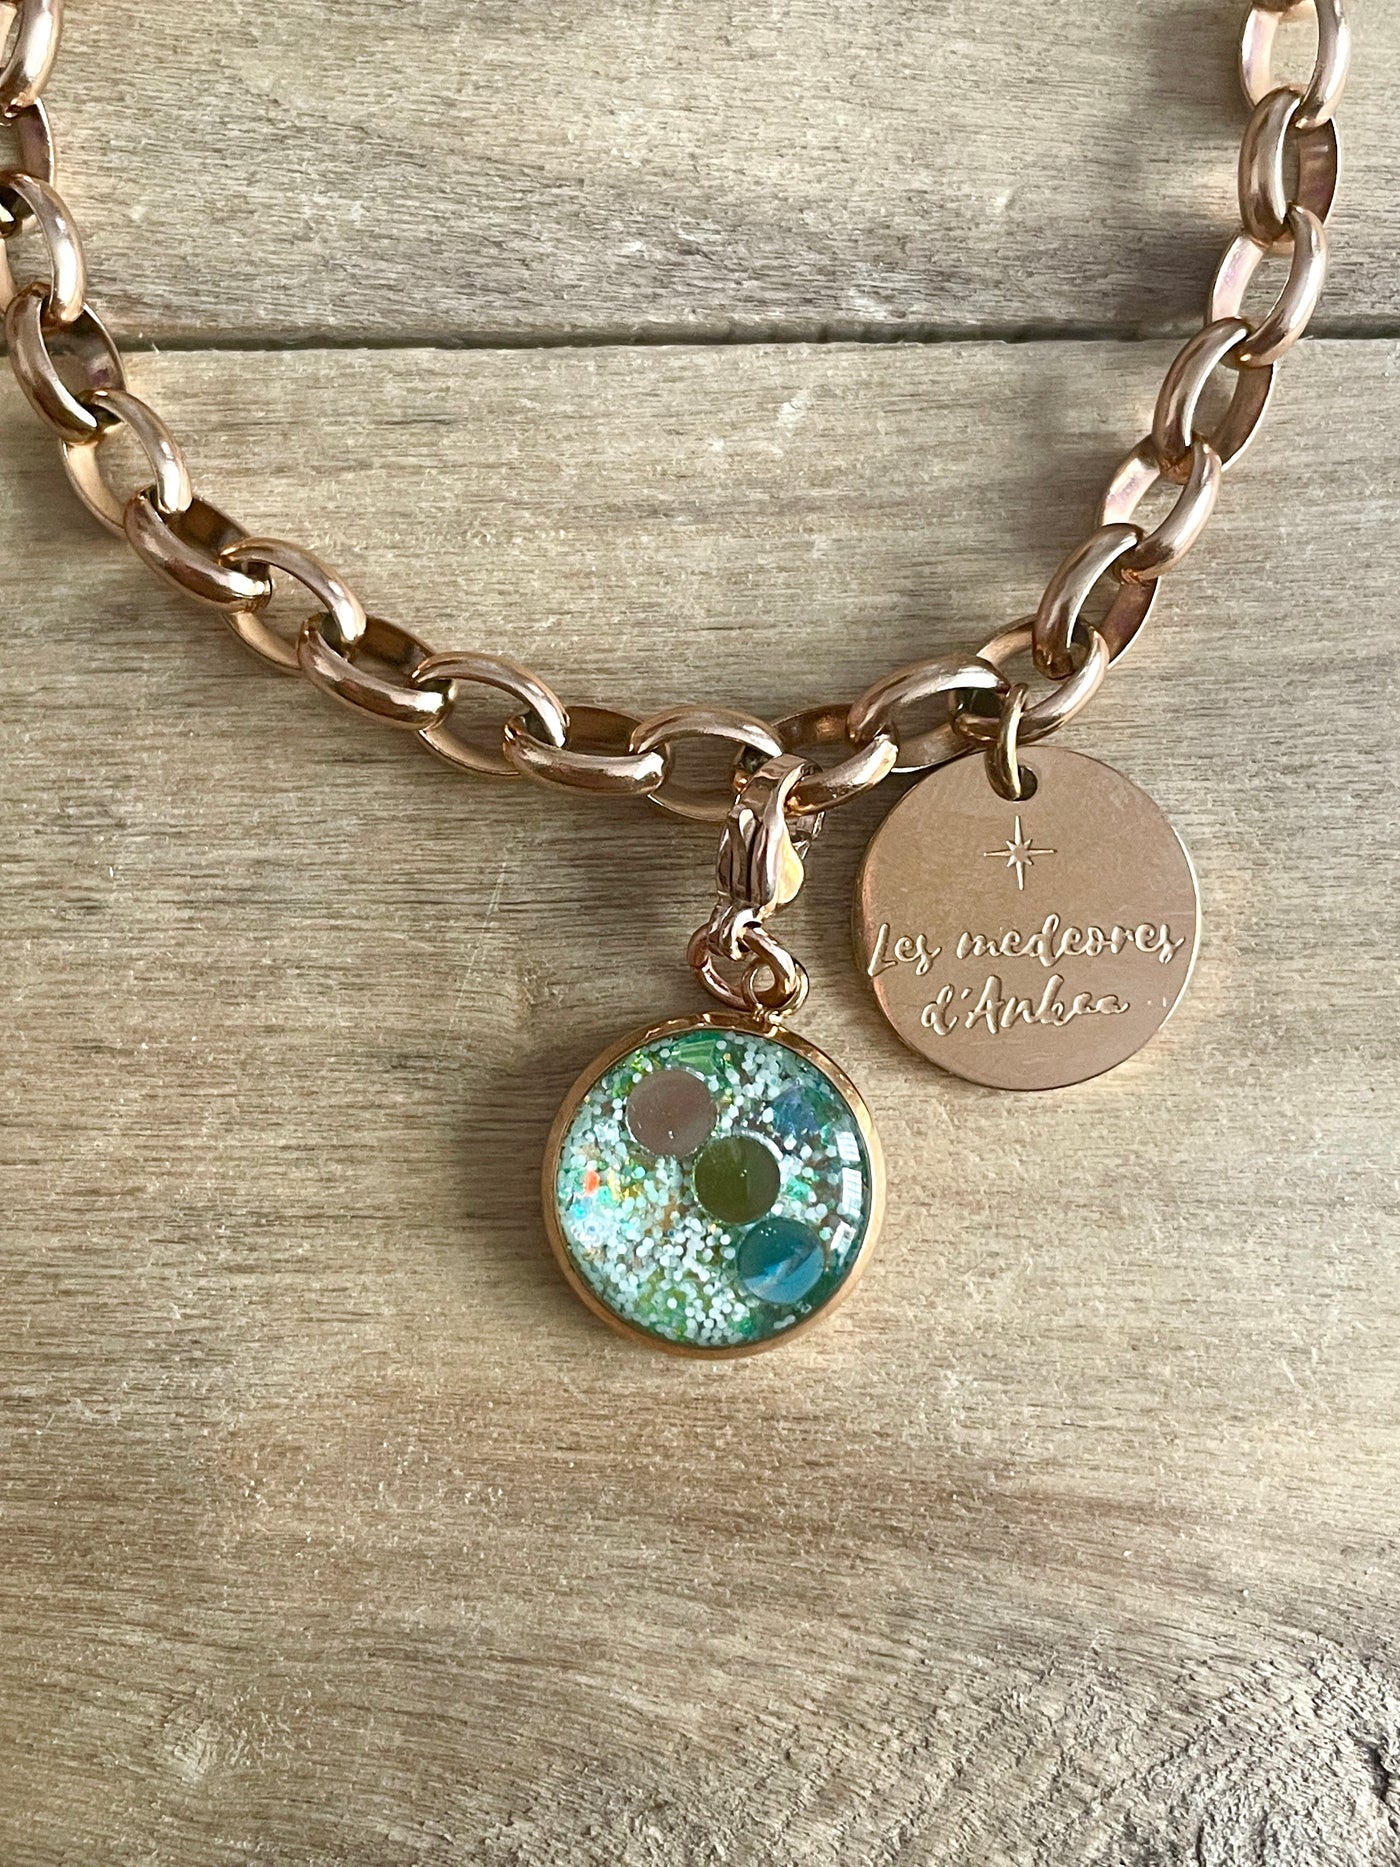 Medeore rose gold OCEAN charm (charm sold alone)